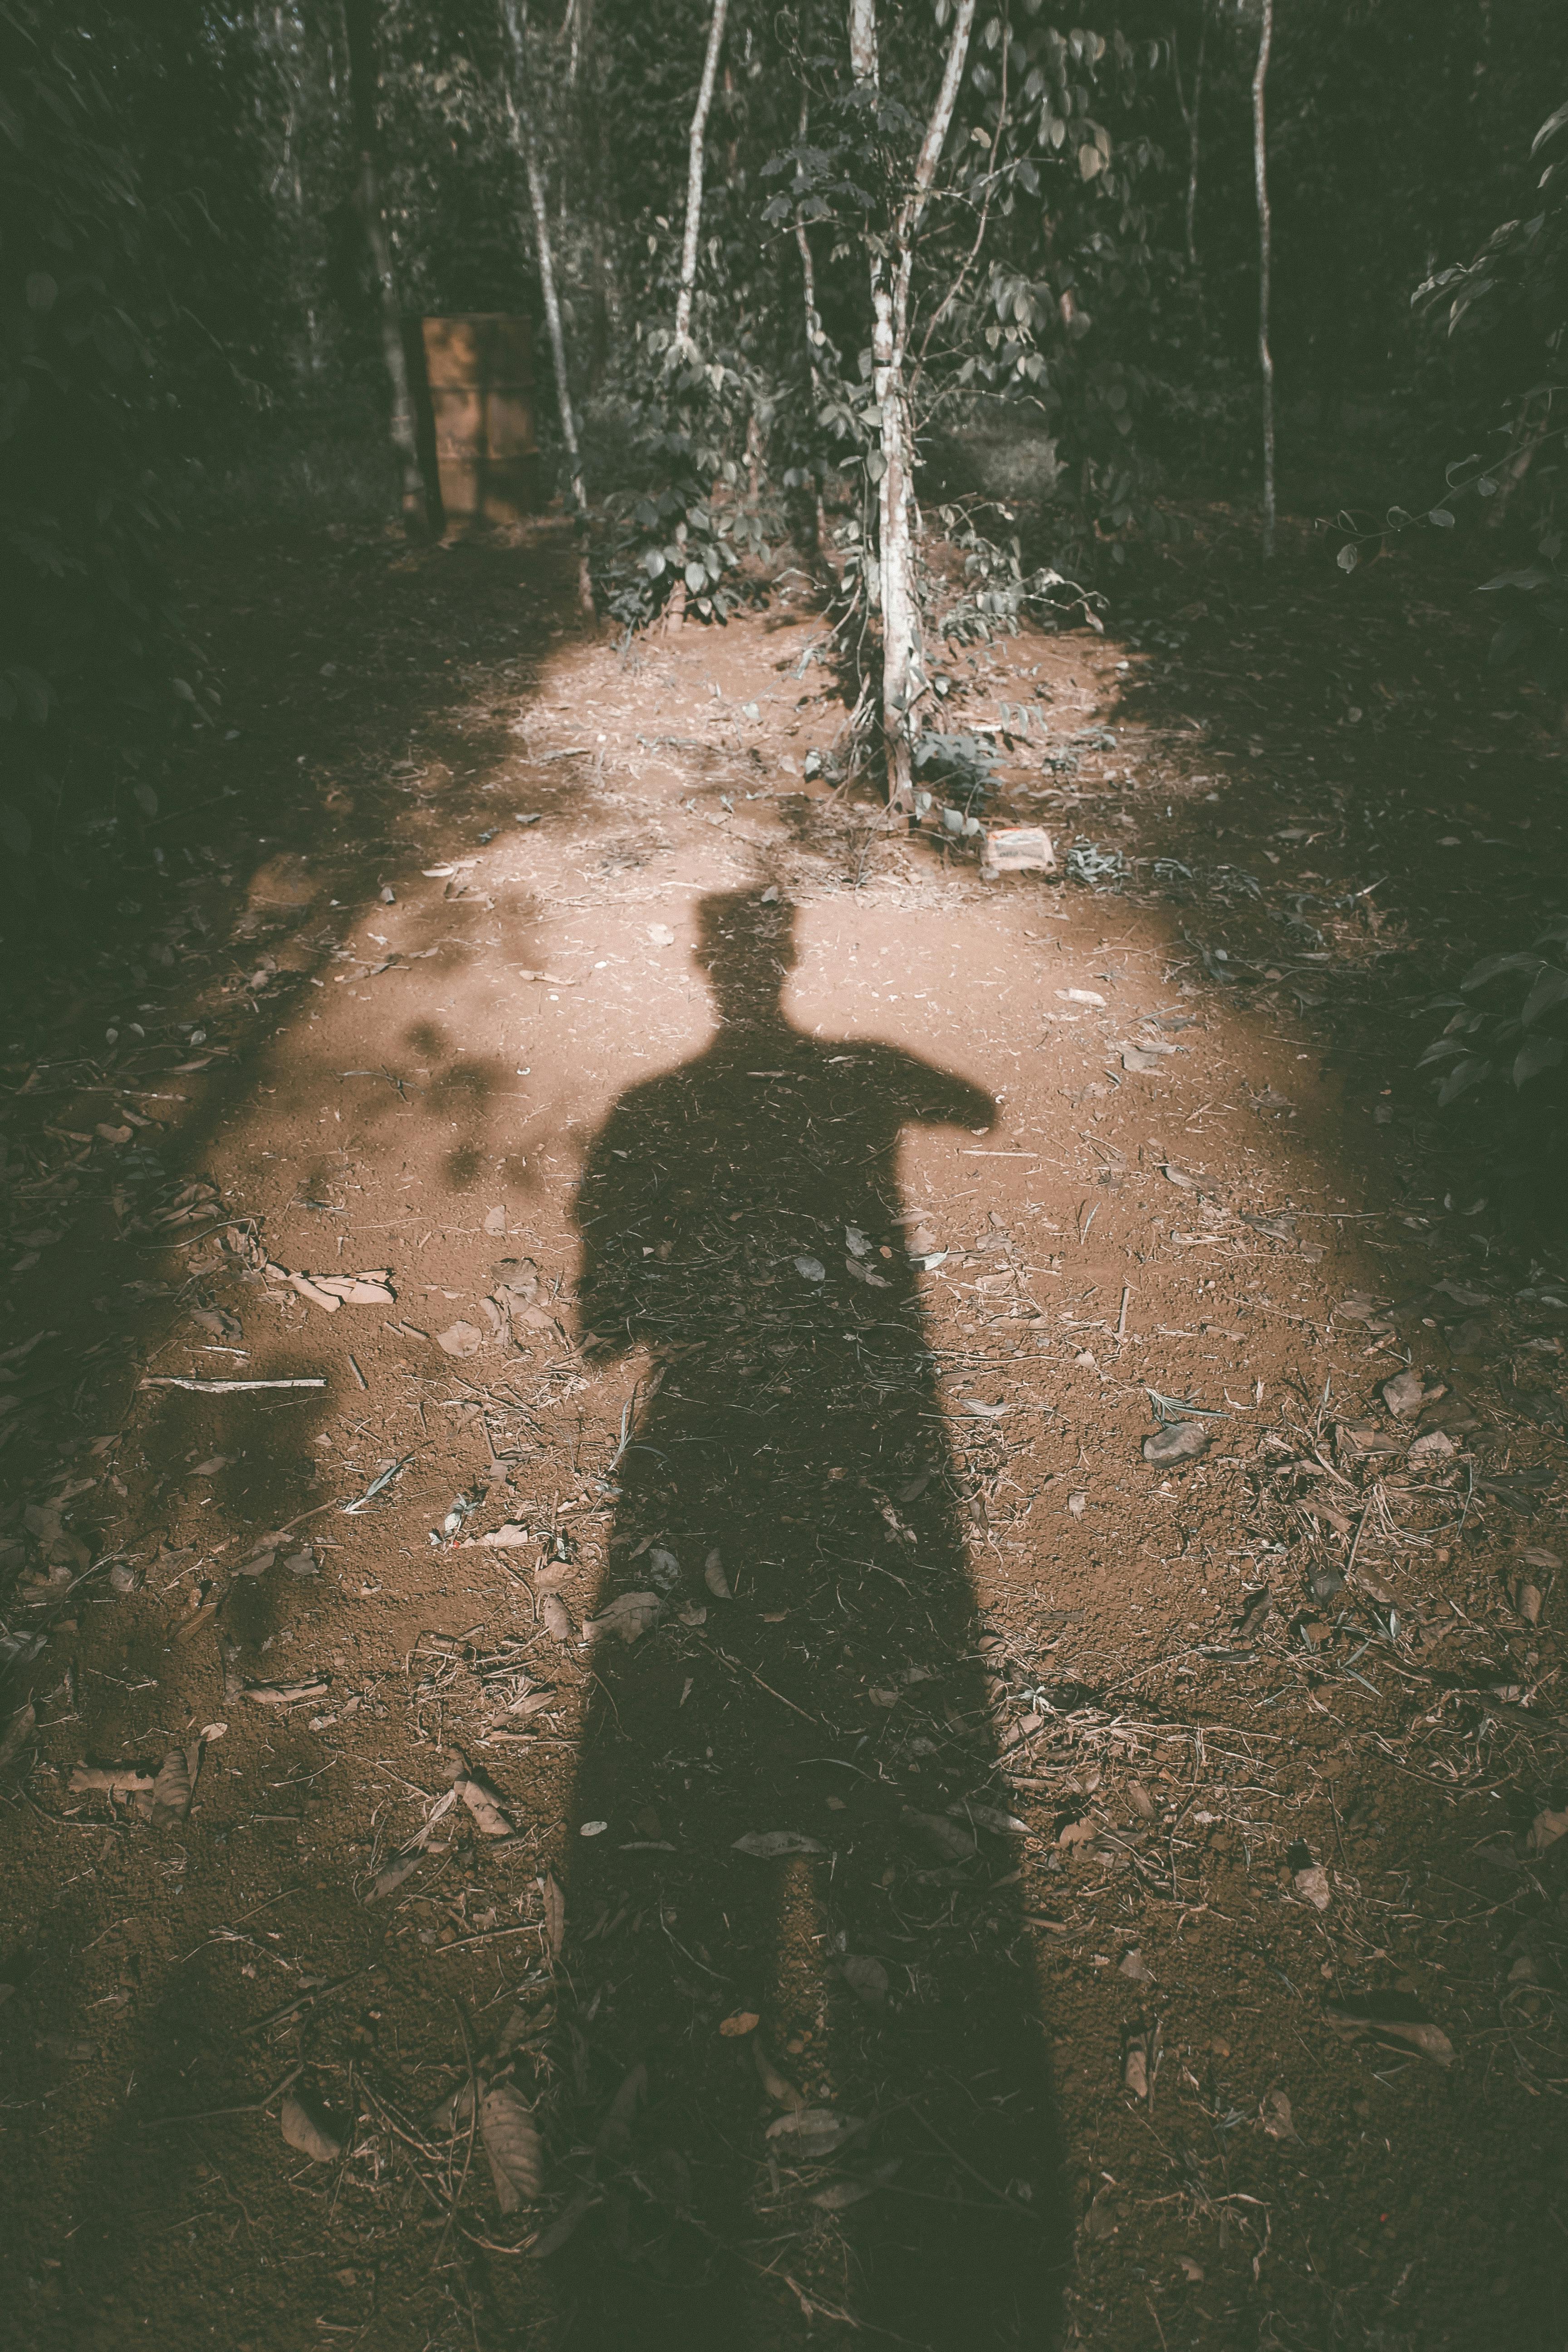 Free stock photo of a person's shadow, evening sun, light and shadow